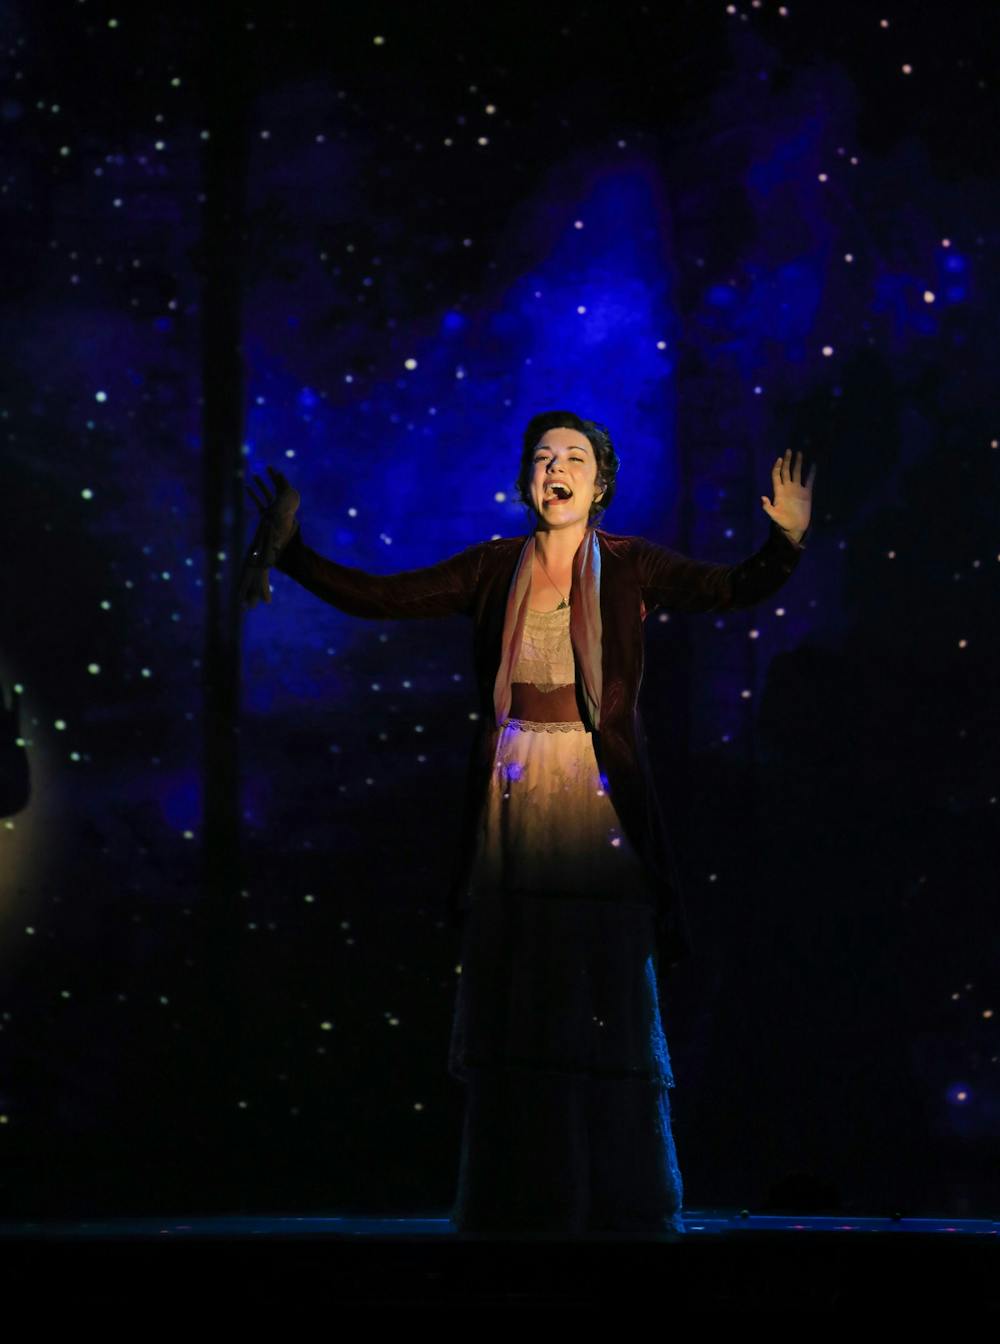  Broadway musical 'Finding Neverland' tackles grief, vulnerability among its spectacle